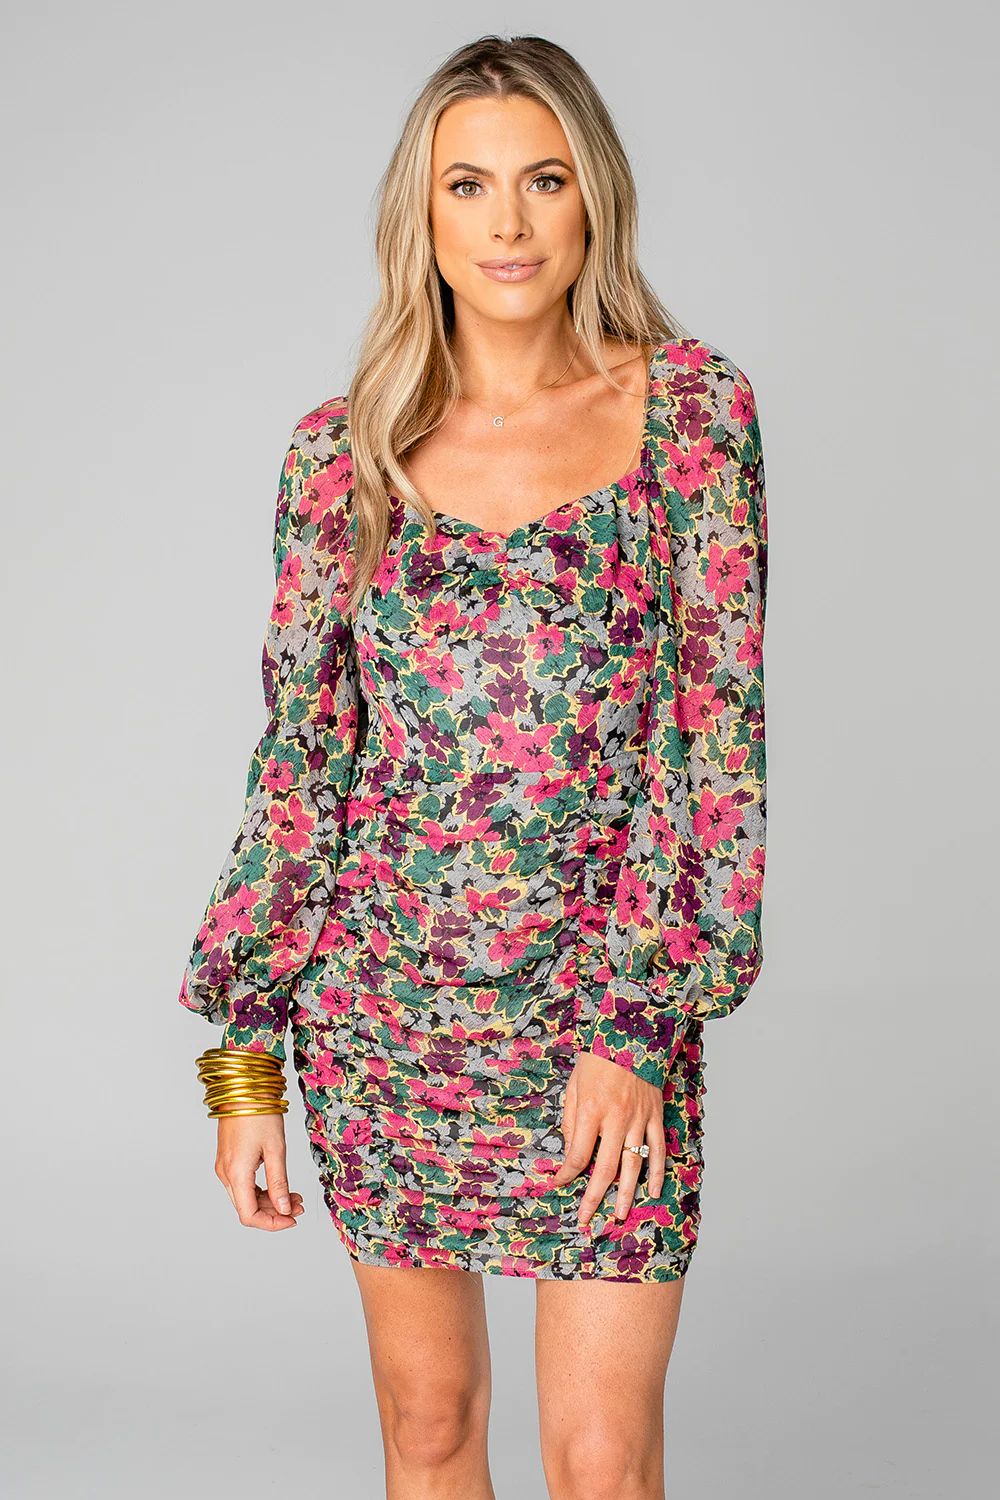 Madeline Long Sleeve Party Dress - Blooms | BuddyLove